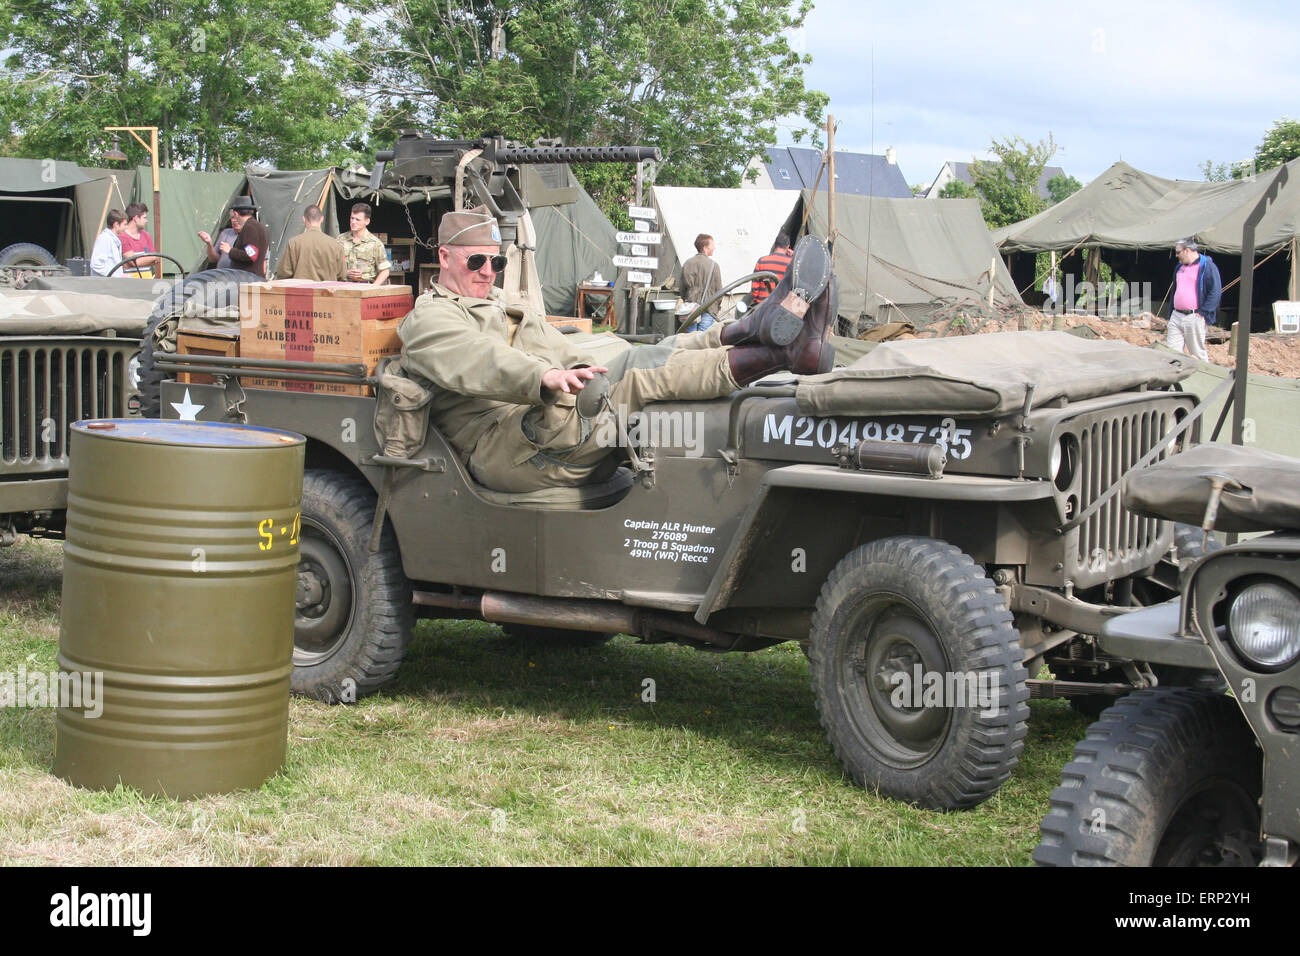 Carentan, Normandy, France. 6 June 2015. Reenactment groups go to great lengths to recreate Camp Arizona on the original site near Carentan in Normandy as part of the D-Day festival 2015. Here a man dressed as a member of the US army relaxes during the D-Day anniversary in an original US army jeep. This year's D-Day Festival commemorates the 70th year of the end of WWII in 1945. Credit:  Daniel and Flossie White/Alamy Live News Stock Photo